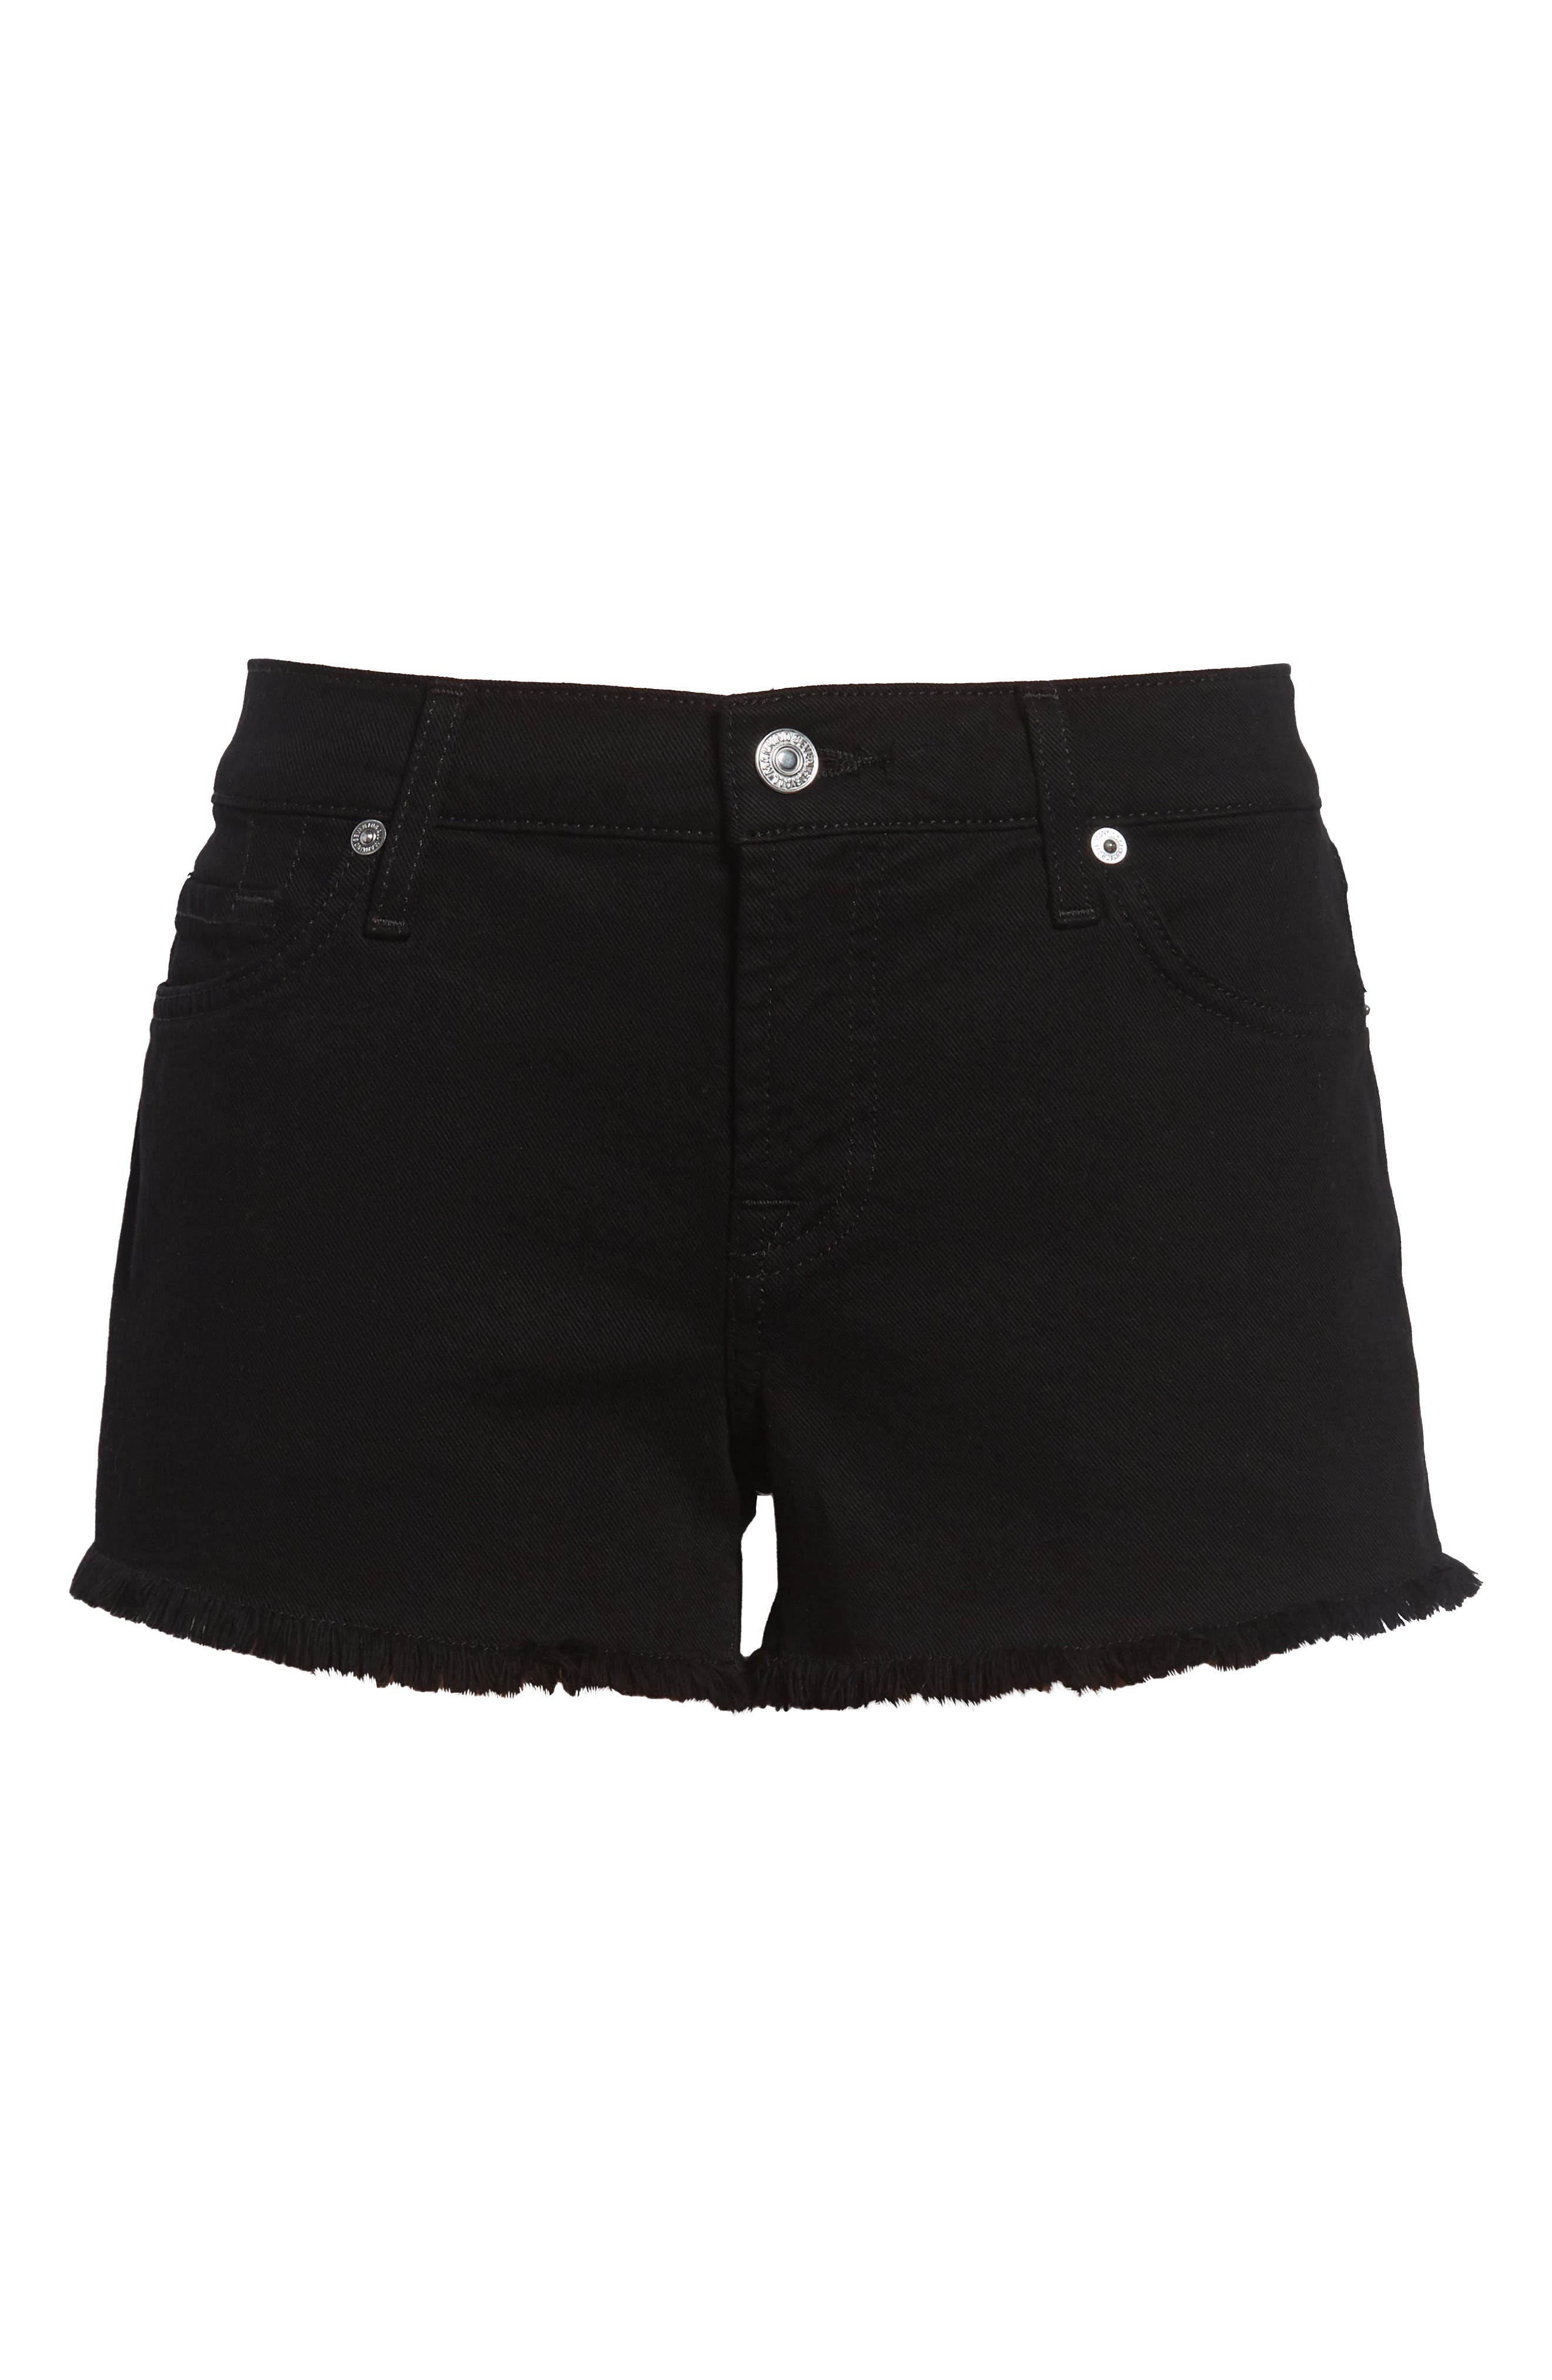 7 for all mankind black shorts